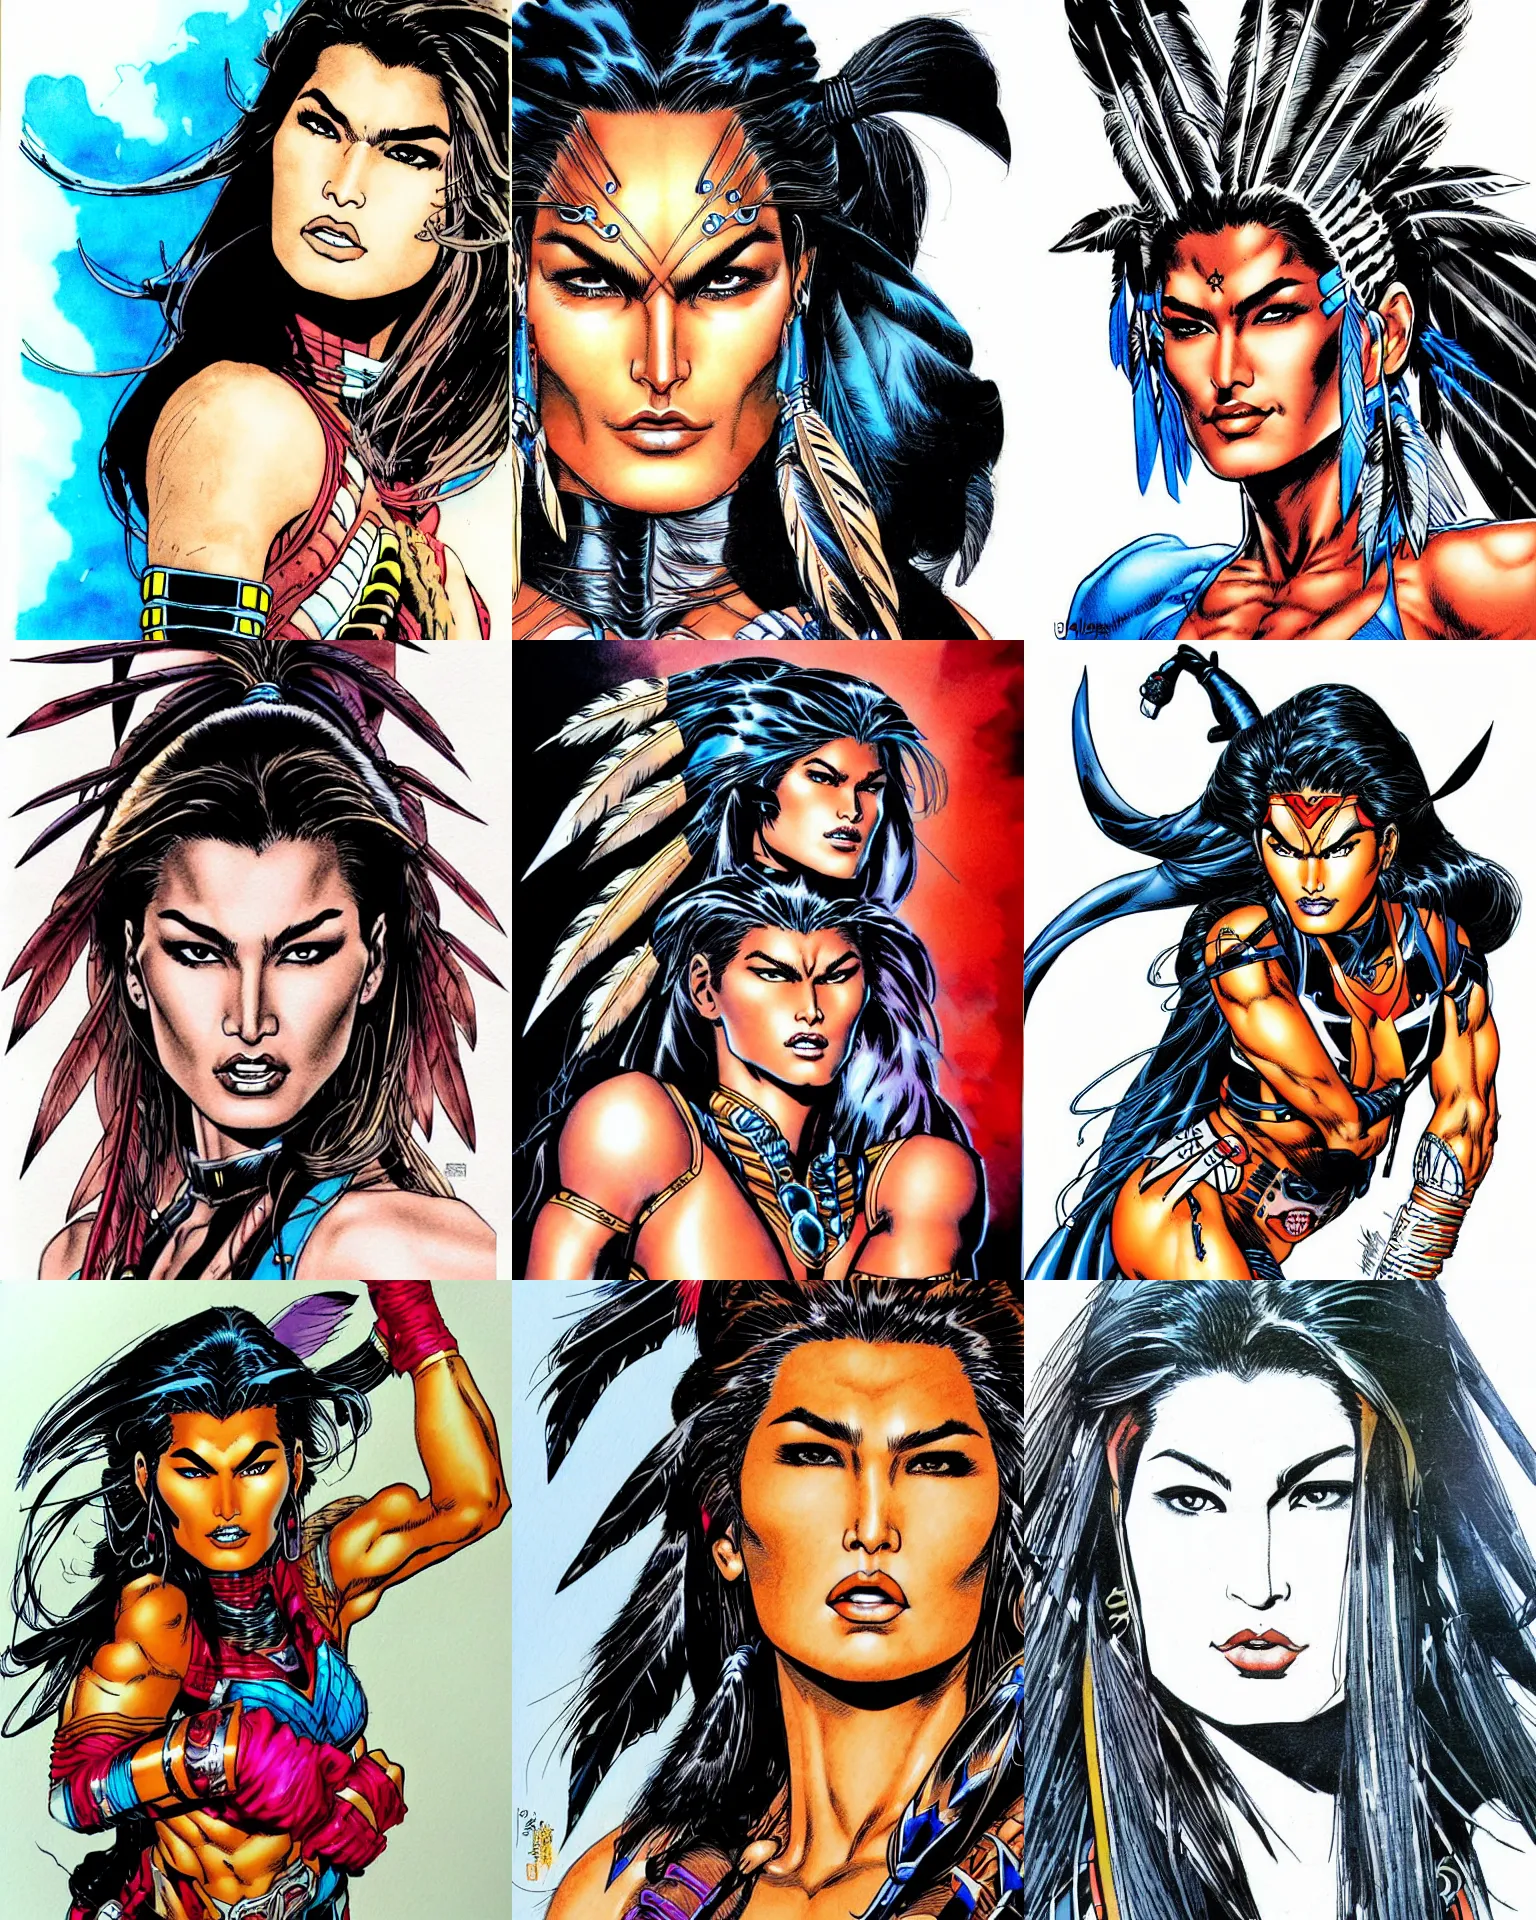 Prompt: jim lee!!! ink colorised airbrushed gouache sketch by jim lee close up headshot of native indian chinese cindy crawford in the style of jim lee, x - men superhero comic book character by jim lee